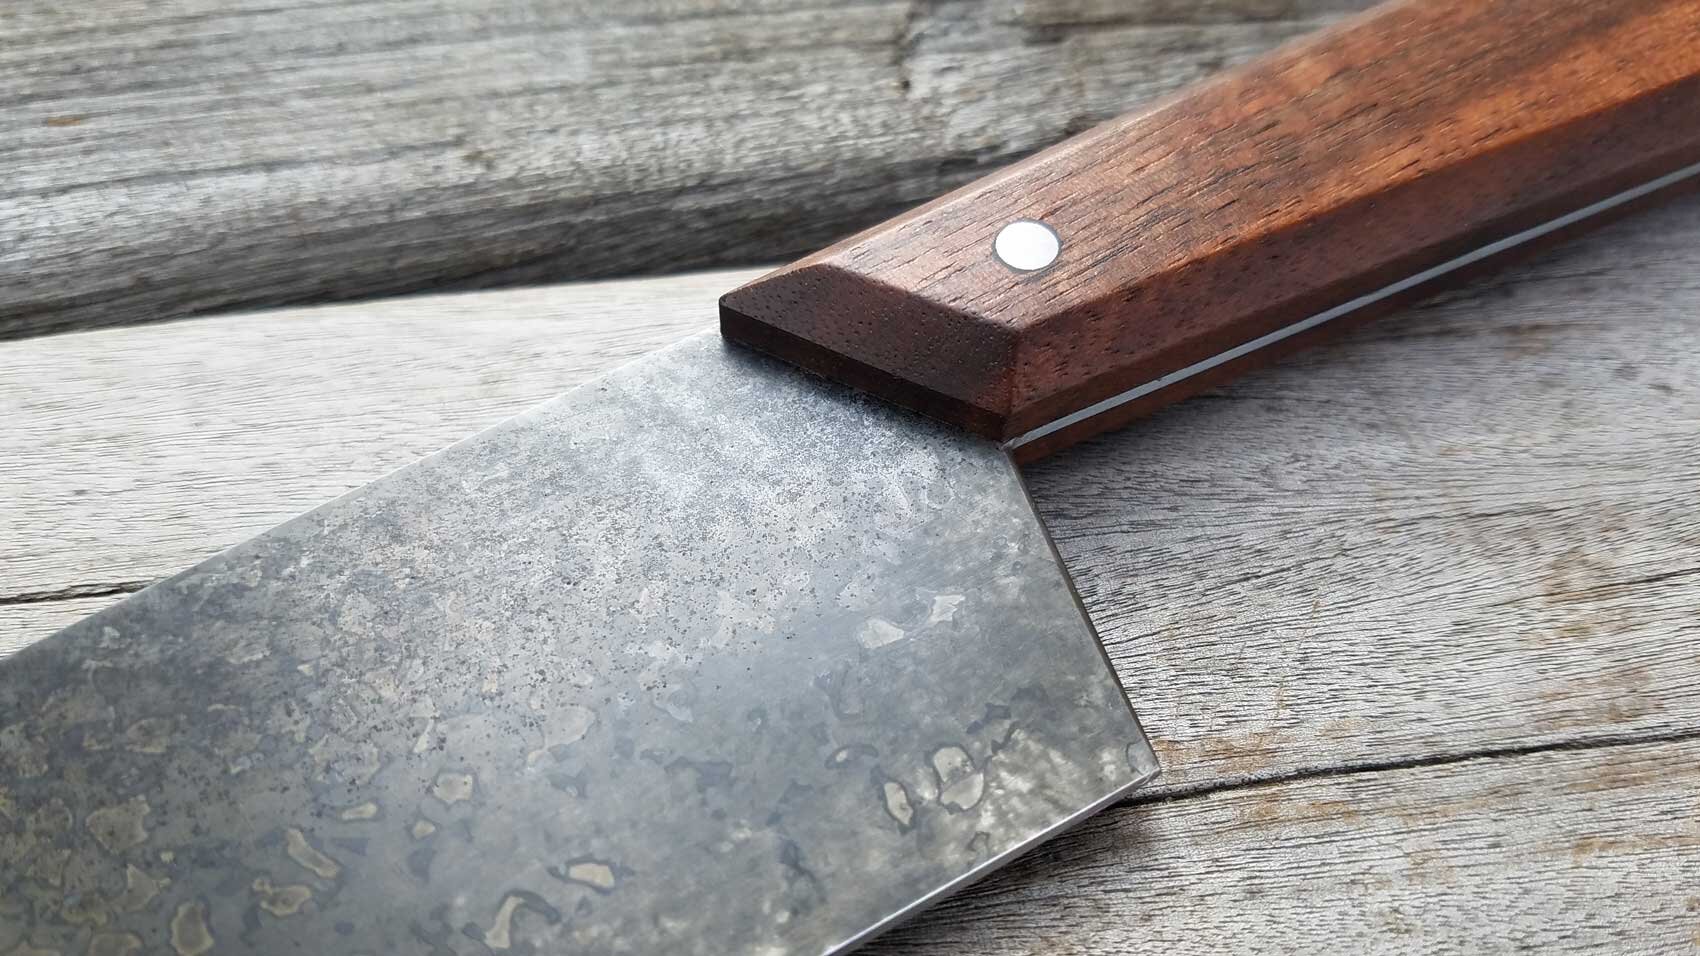  Each blade is made from a repurposed antique saw. 